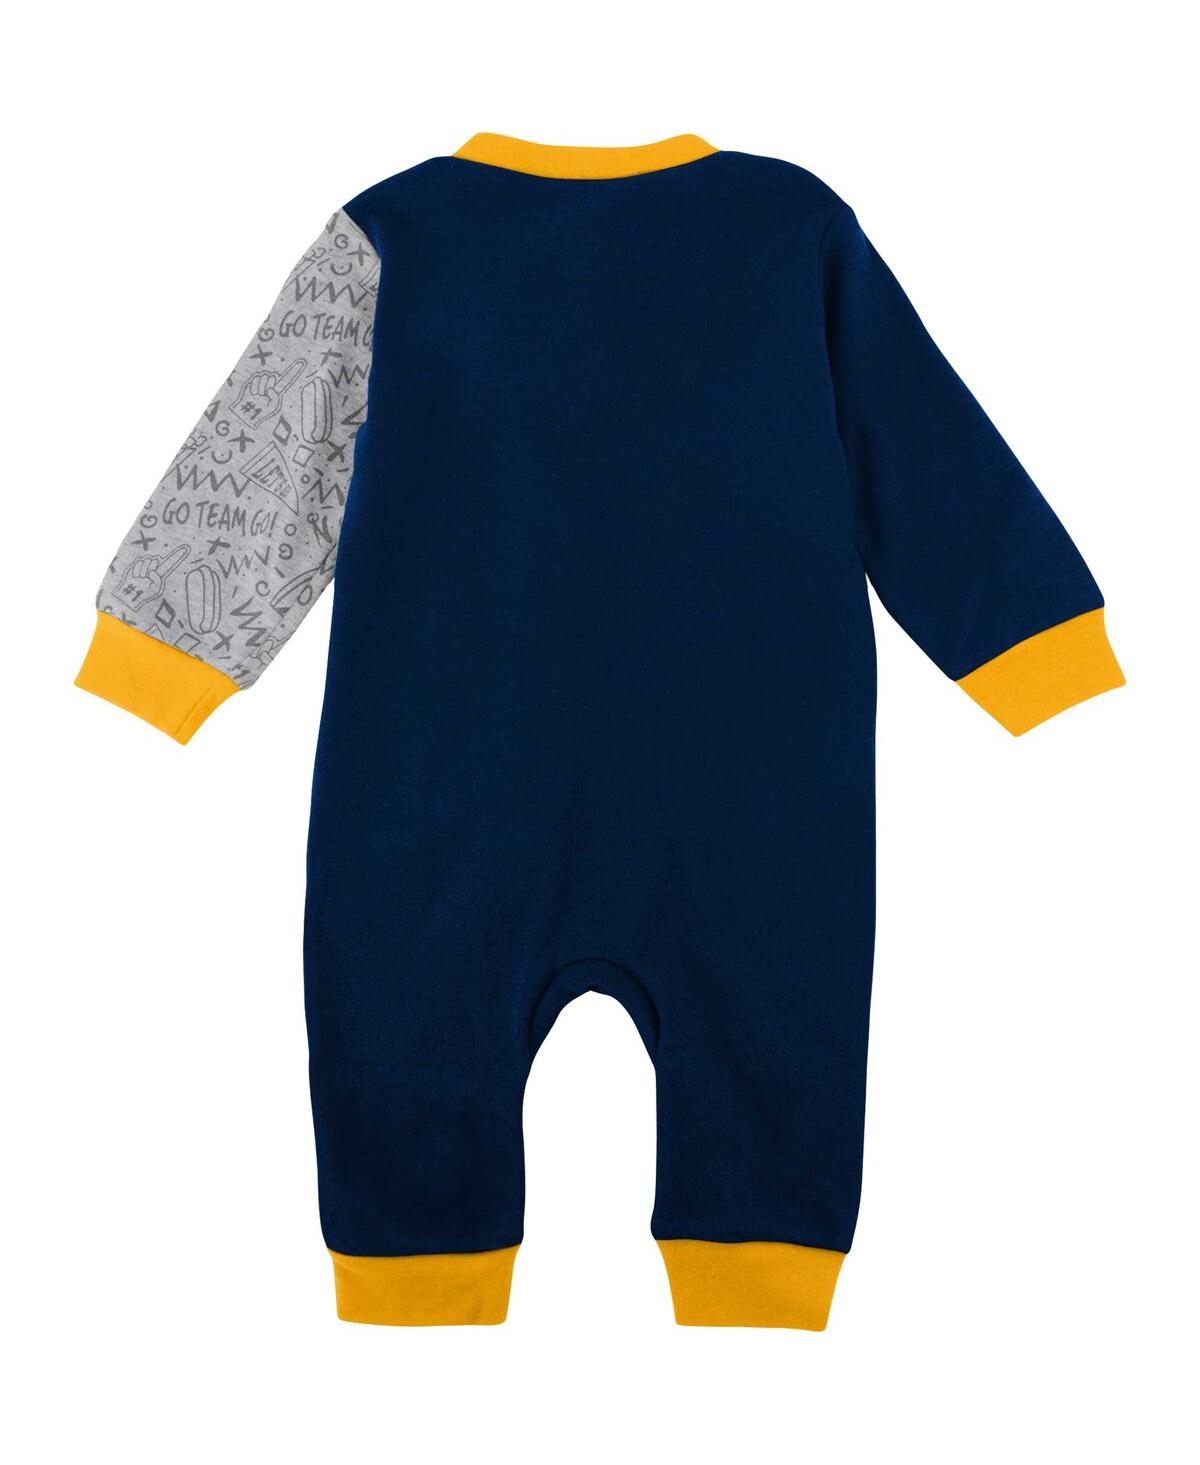 Shop Outerstuff Infant Boys And Girls Navy West Virginia Mountaineers Playbook Two-tone Sleeper